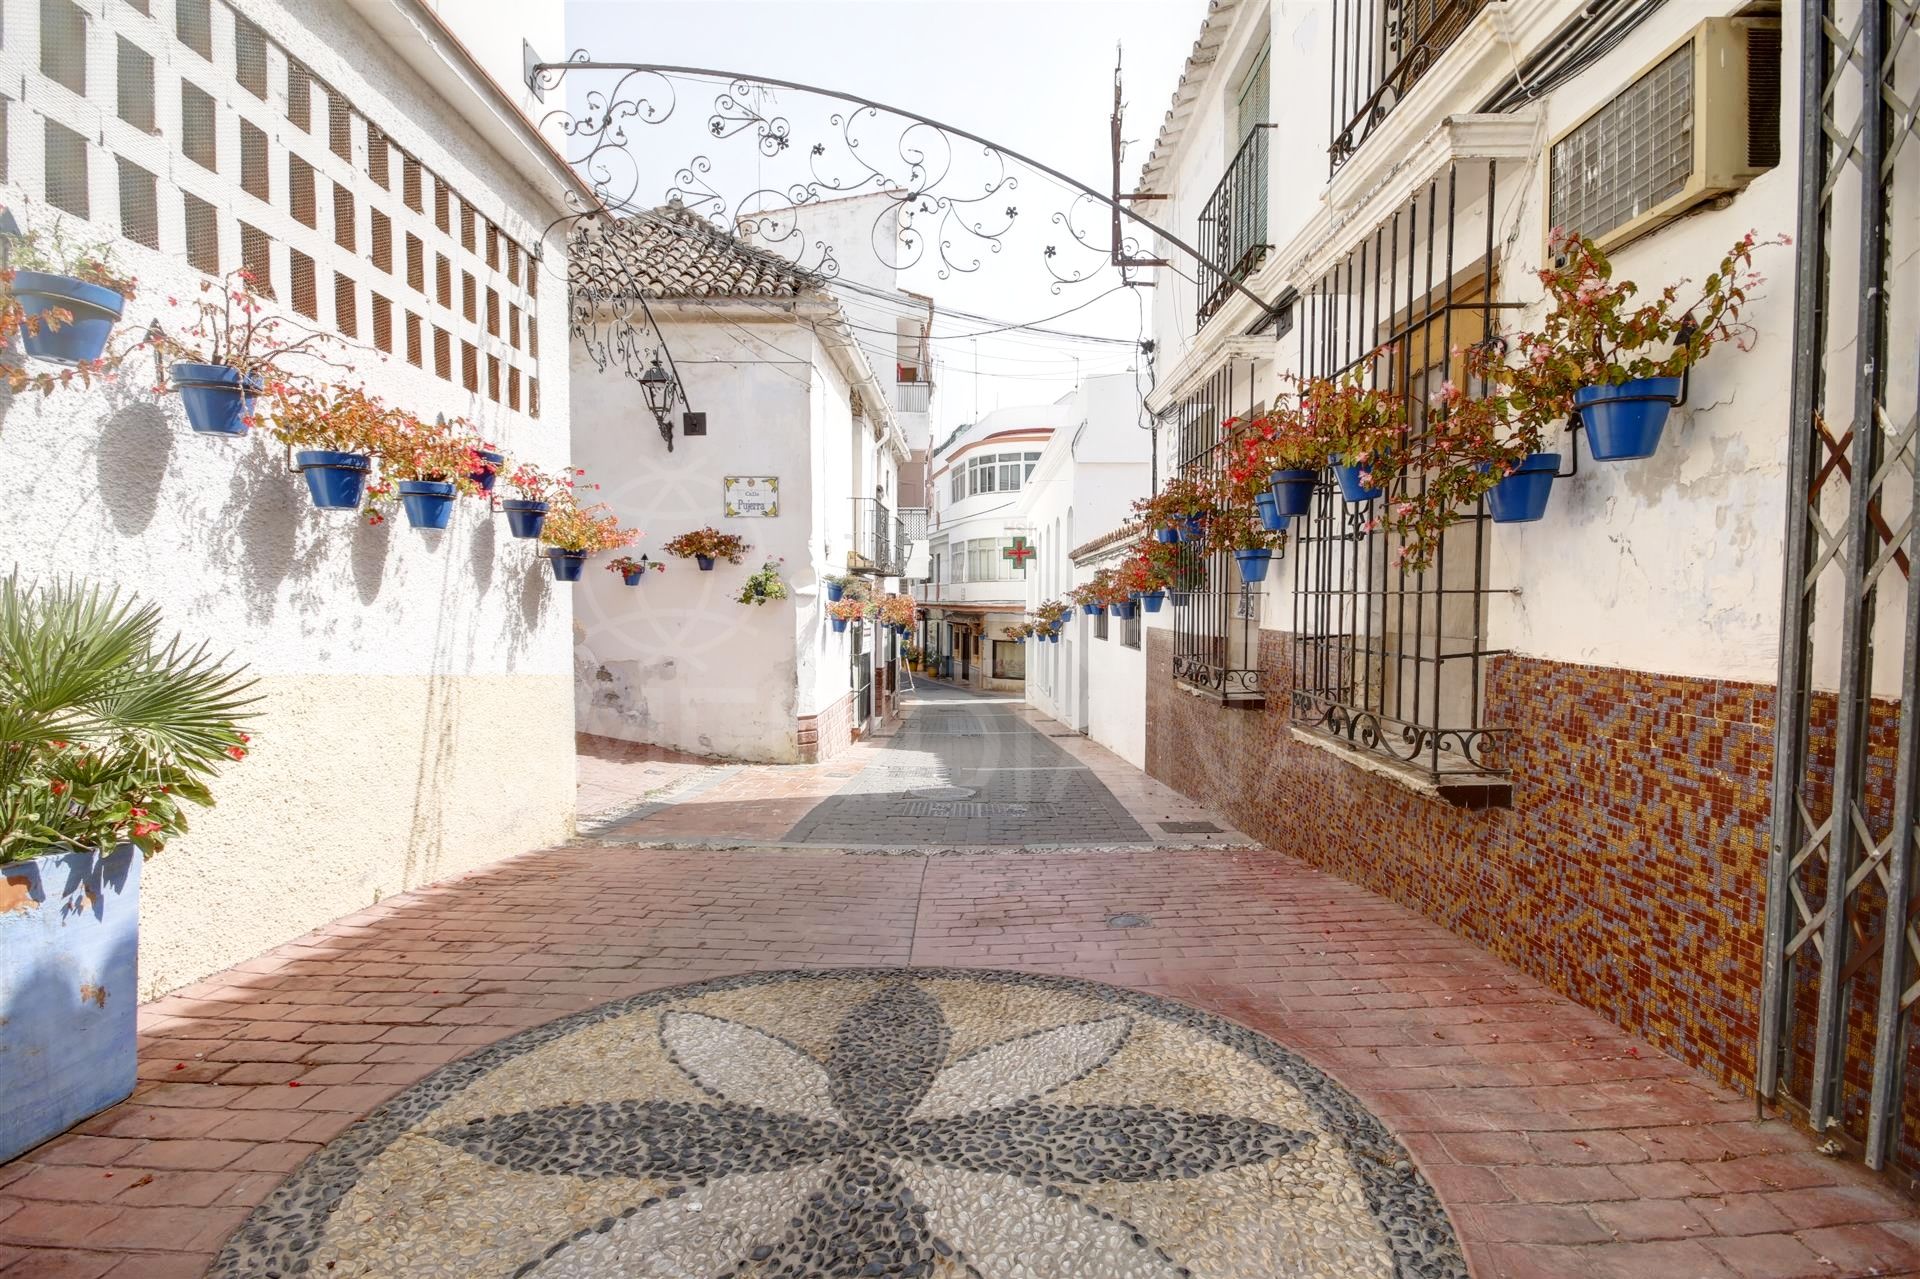 Commercial for sale in the old town of Estepona, with project for 3 apartments, next to the beach